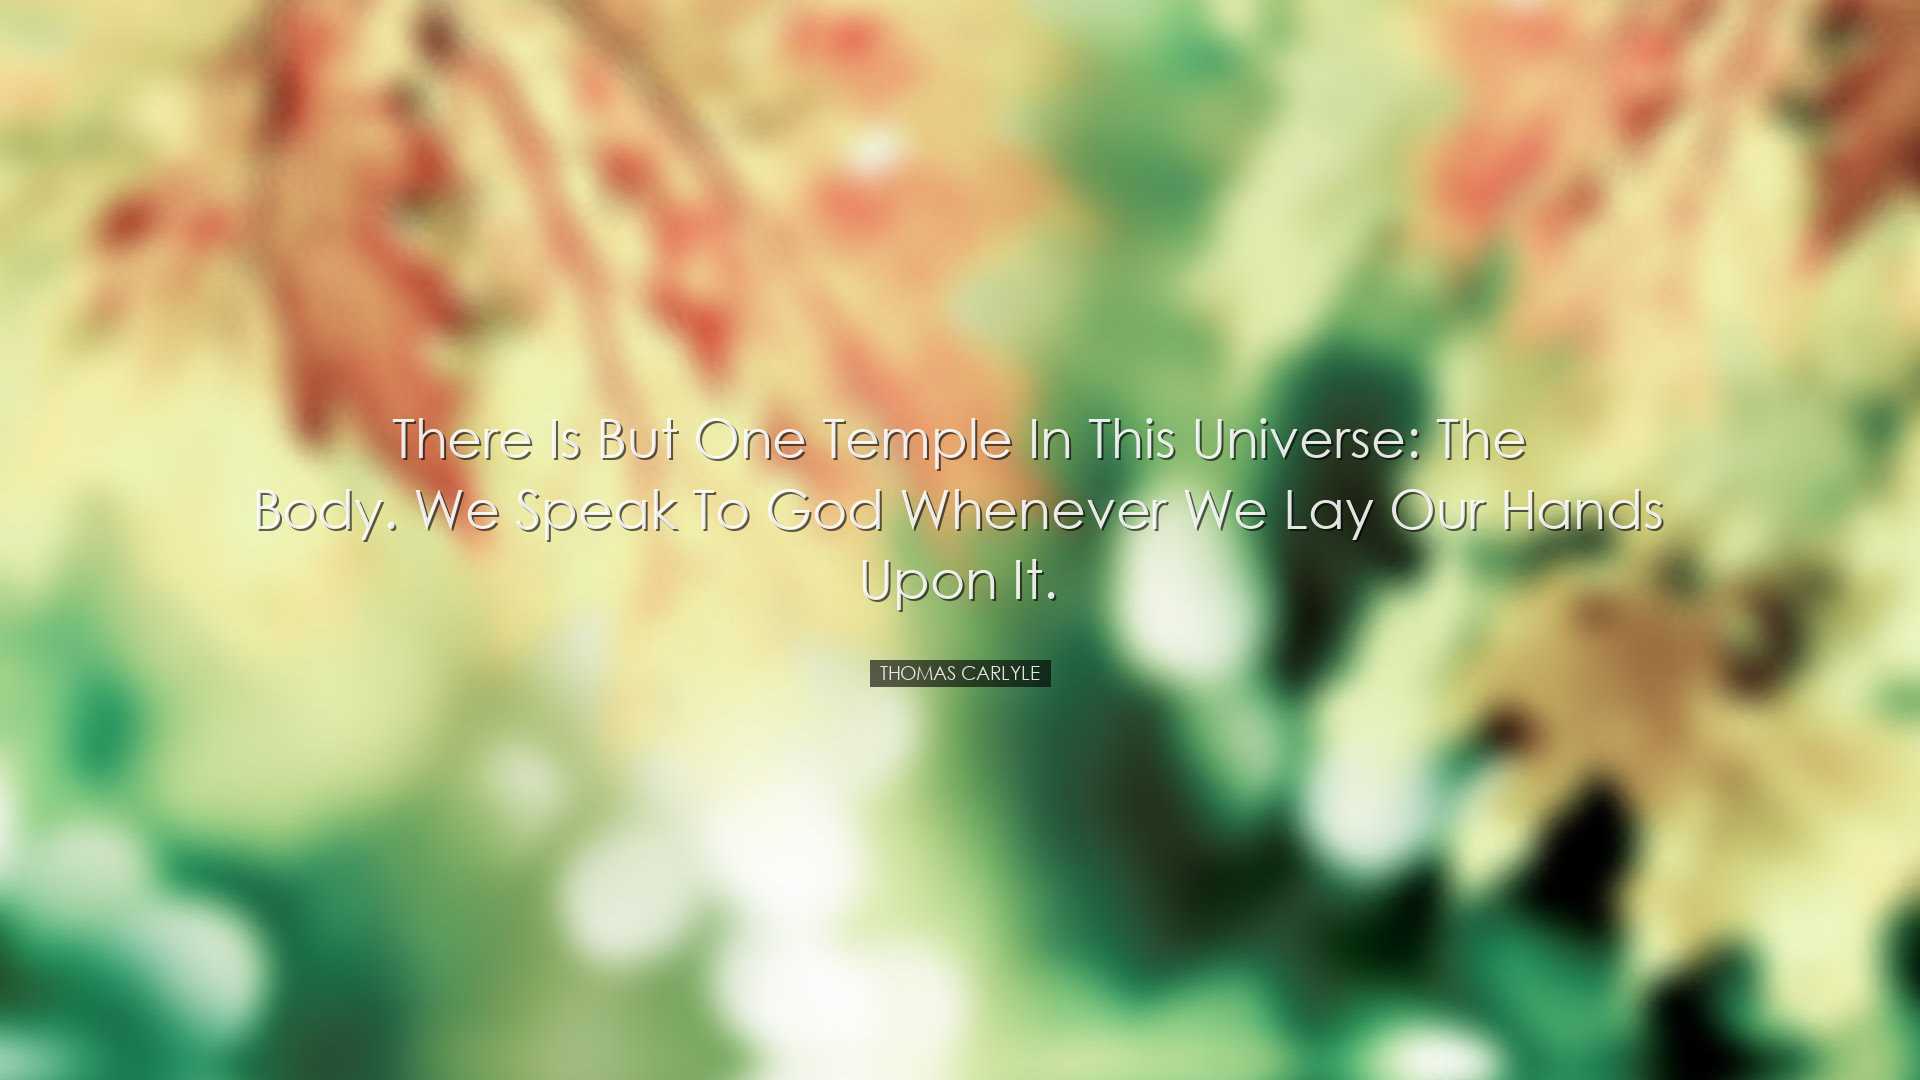 There is but one temple in this Universe: The Body. We speak to Go